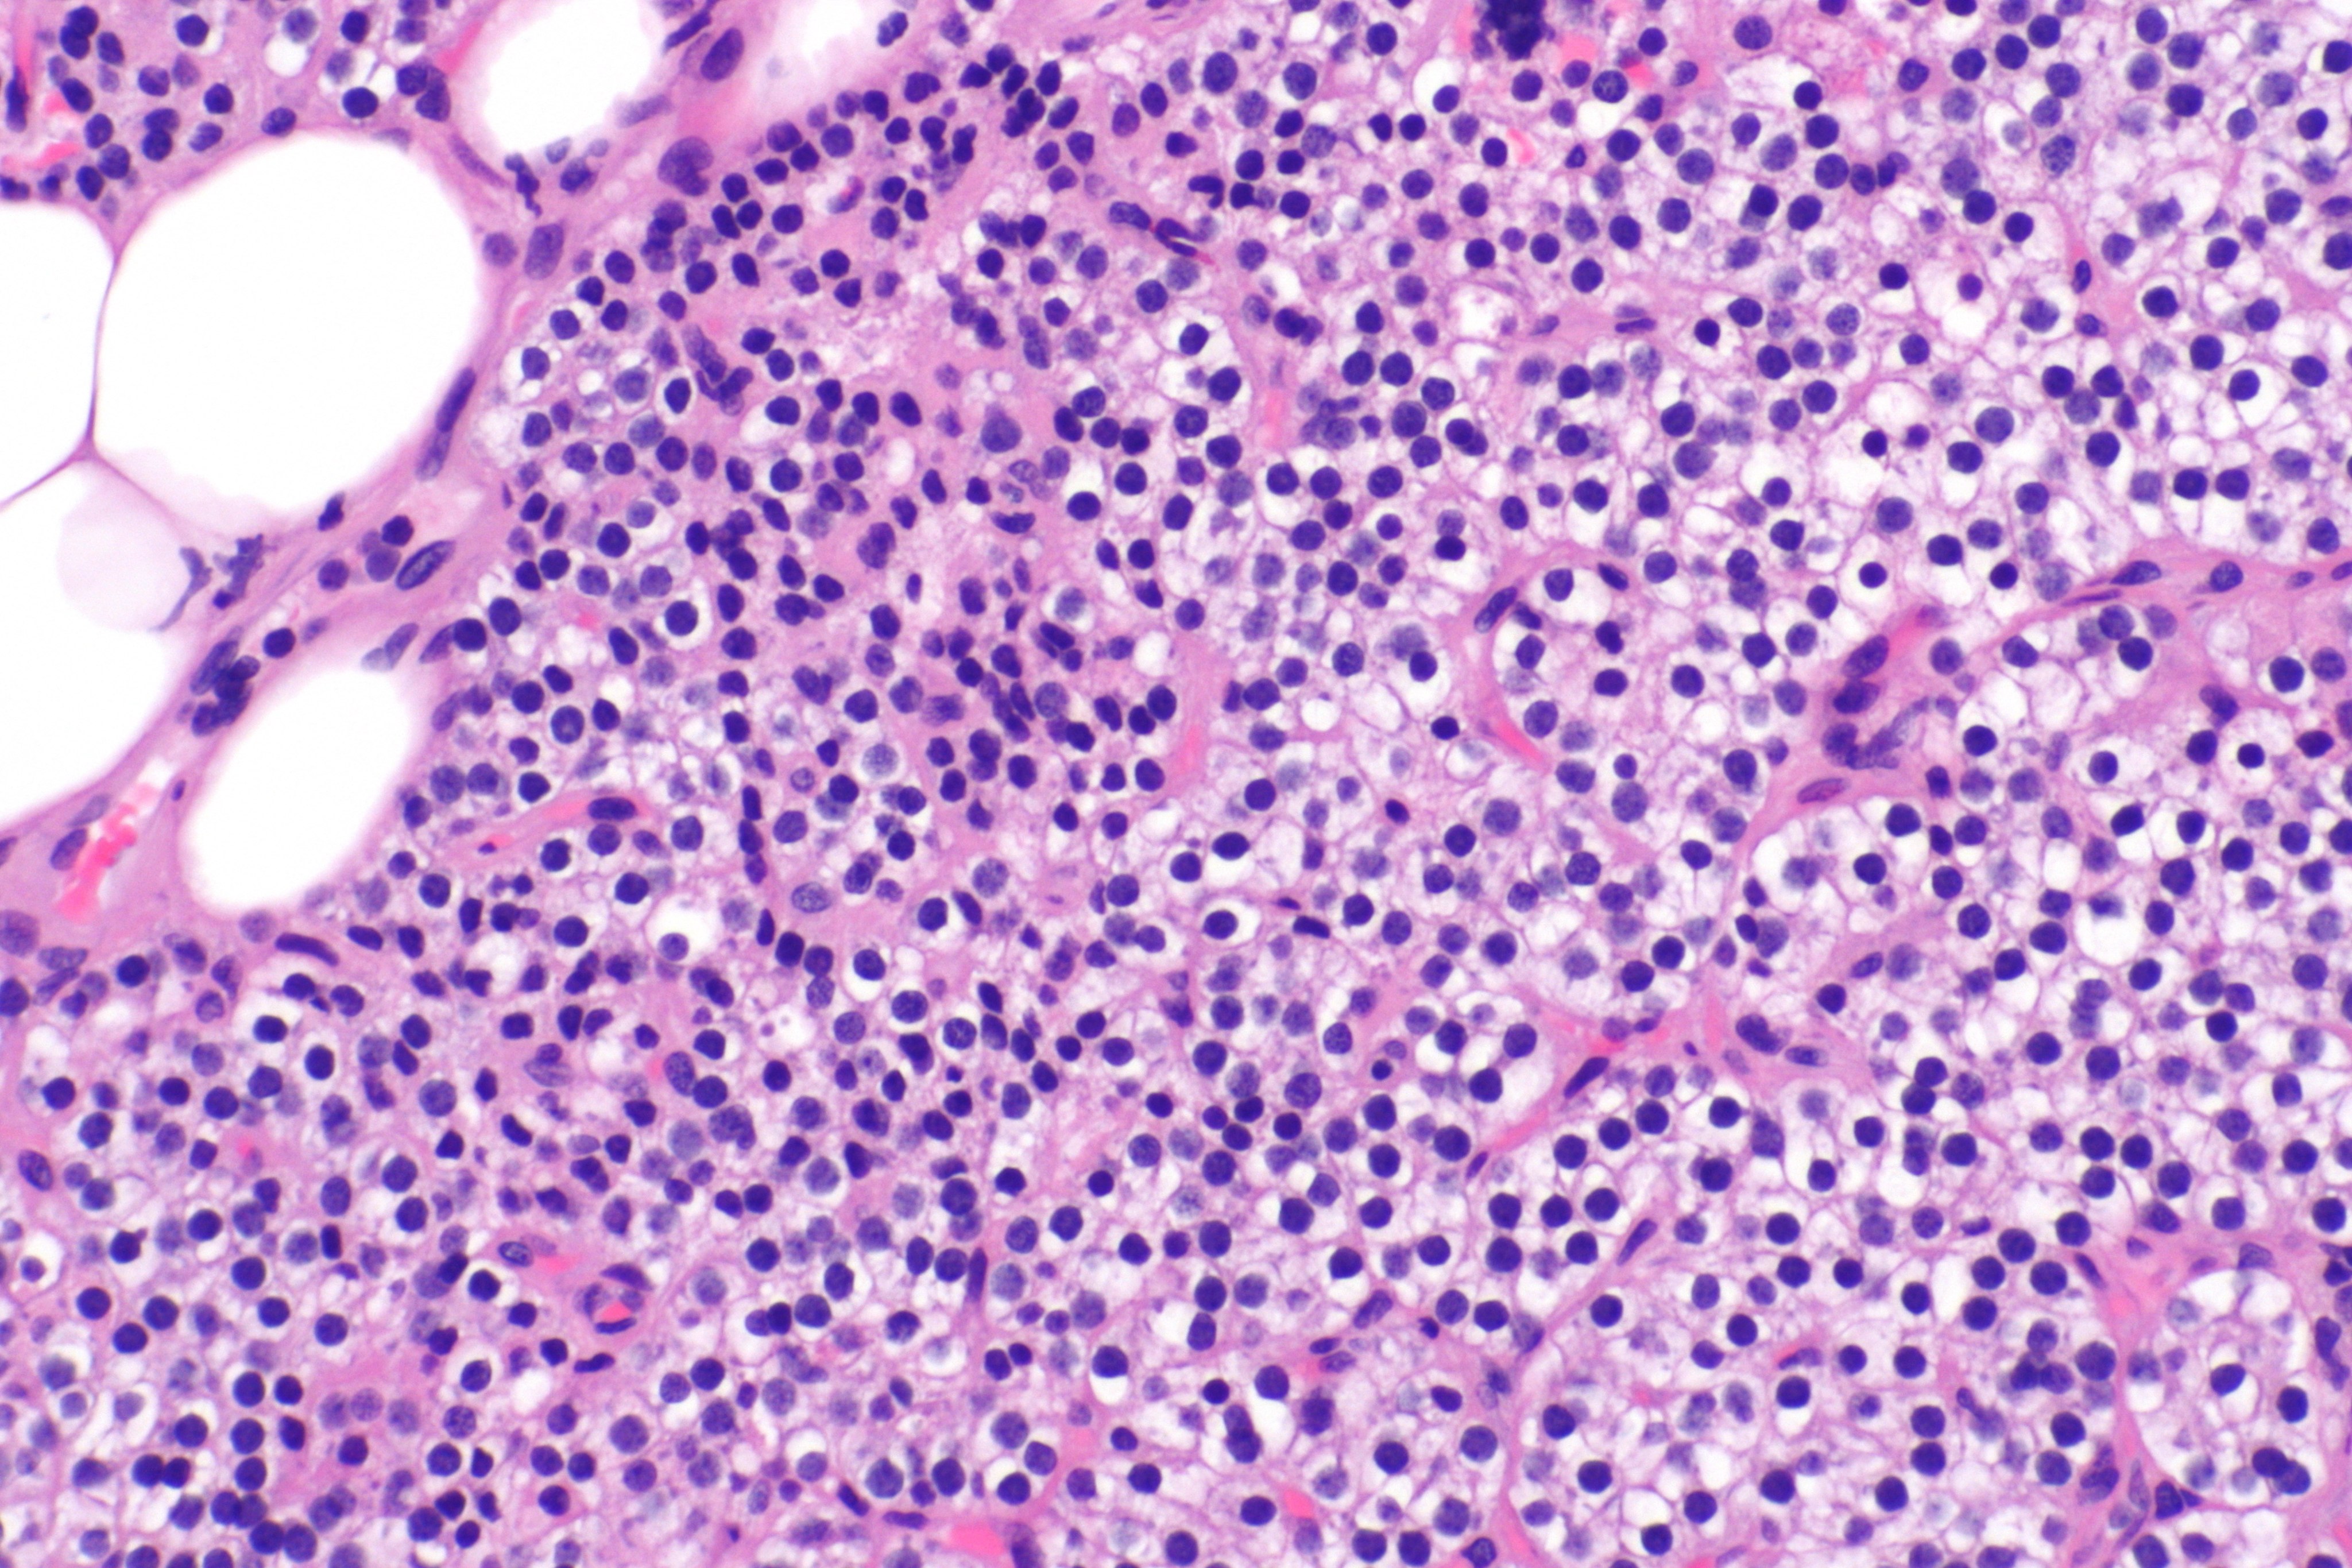 Micrograph showing a parathyroid hyperplasia (H&E stain) on high magnification.Parathyroid adenoma is a clinicopathologic diagnosis. The histology is nonspecific. - Source: Wikimedia commons